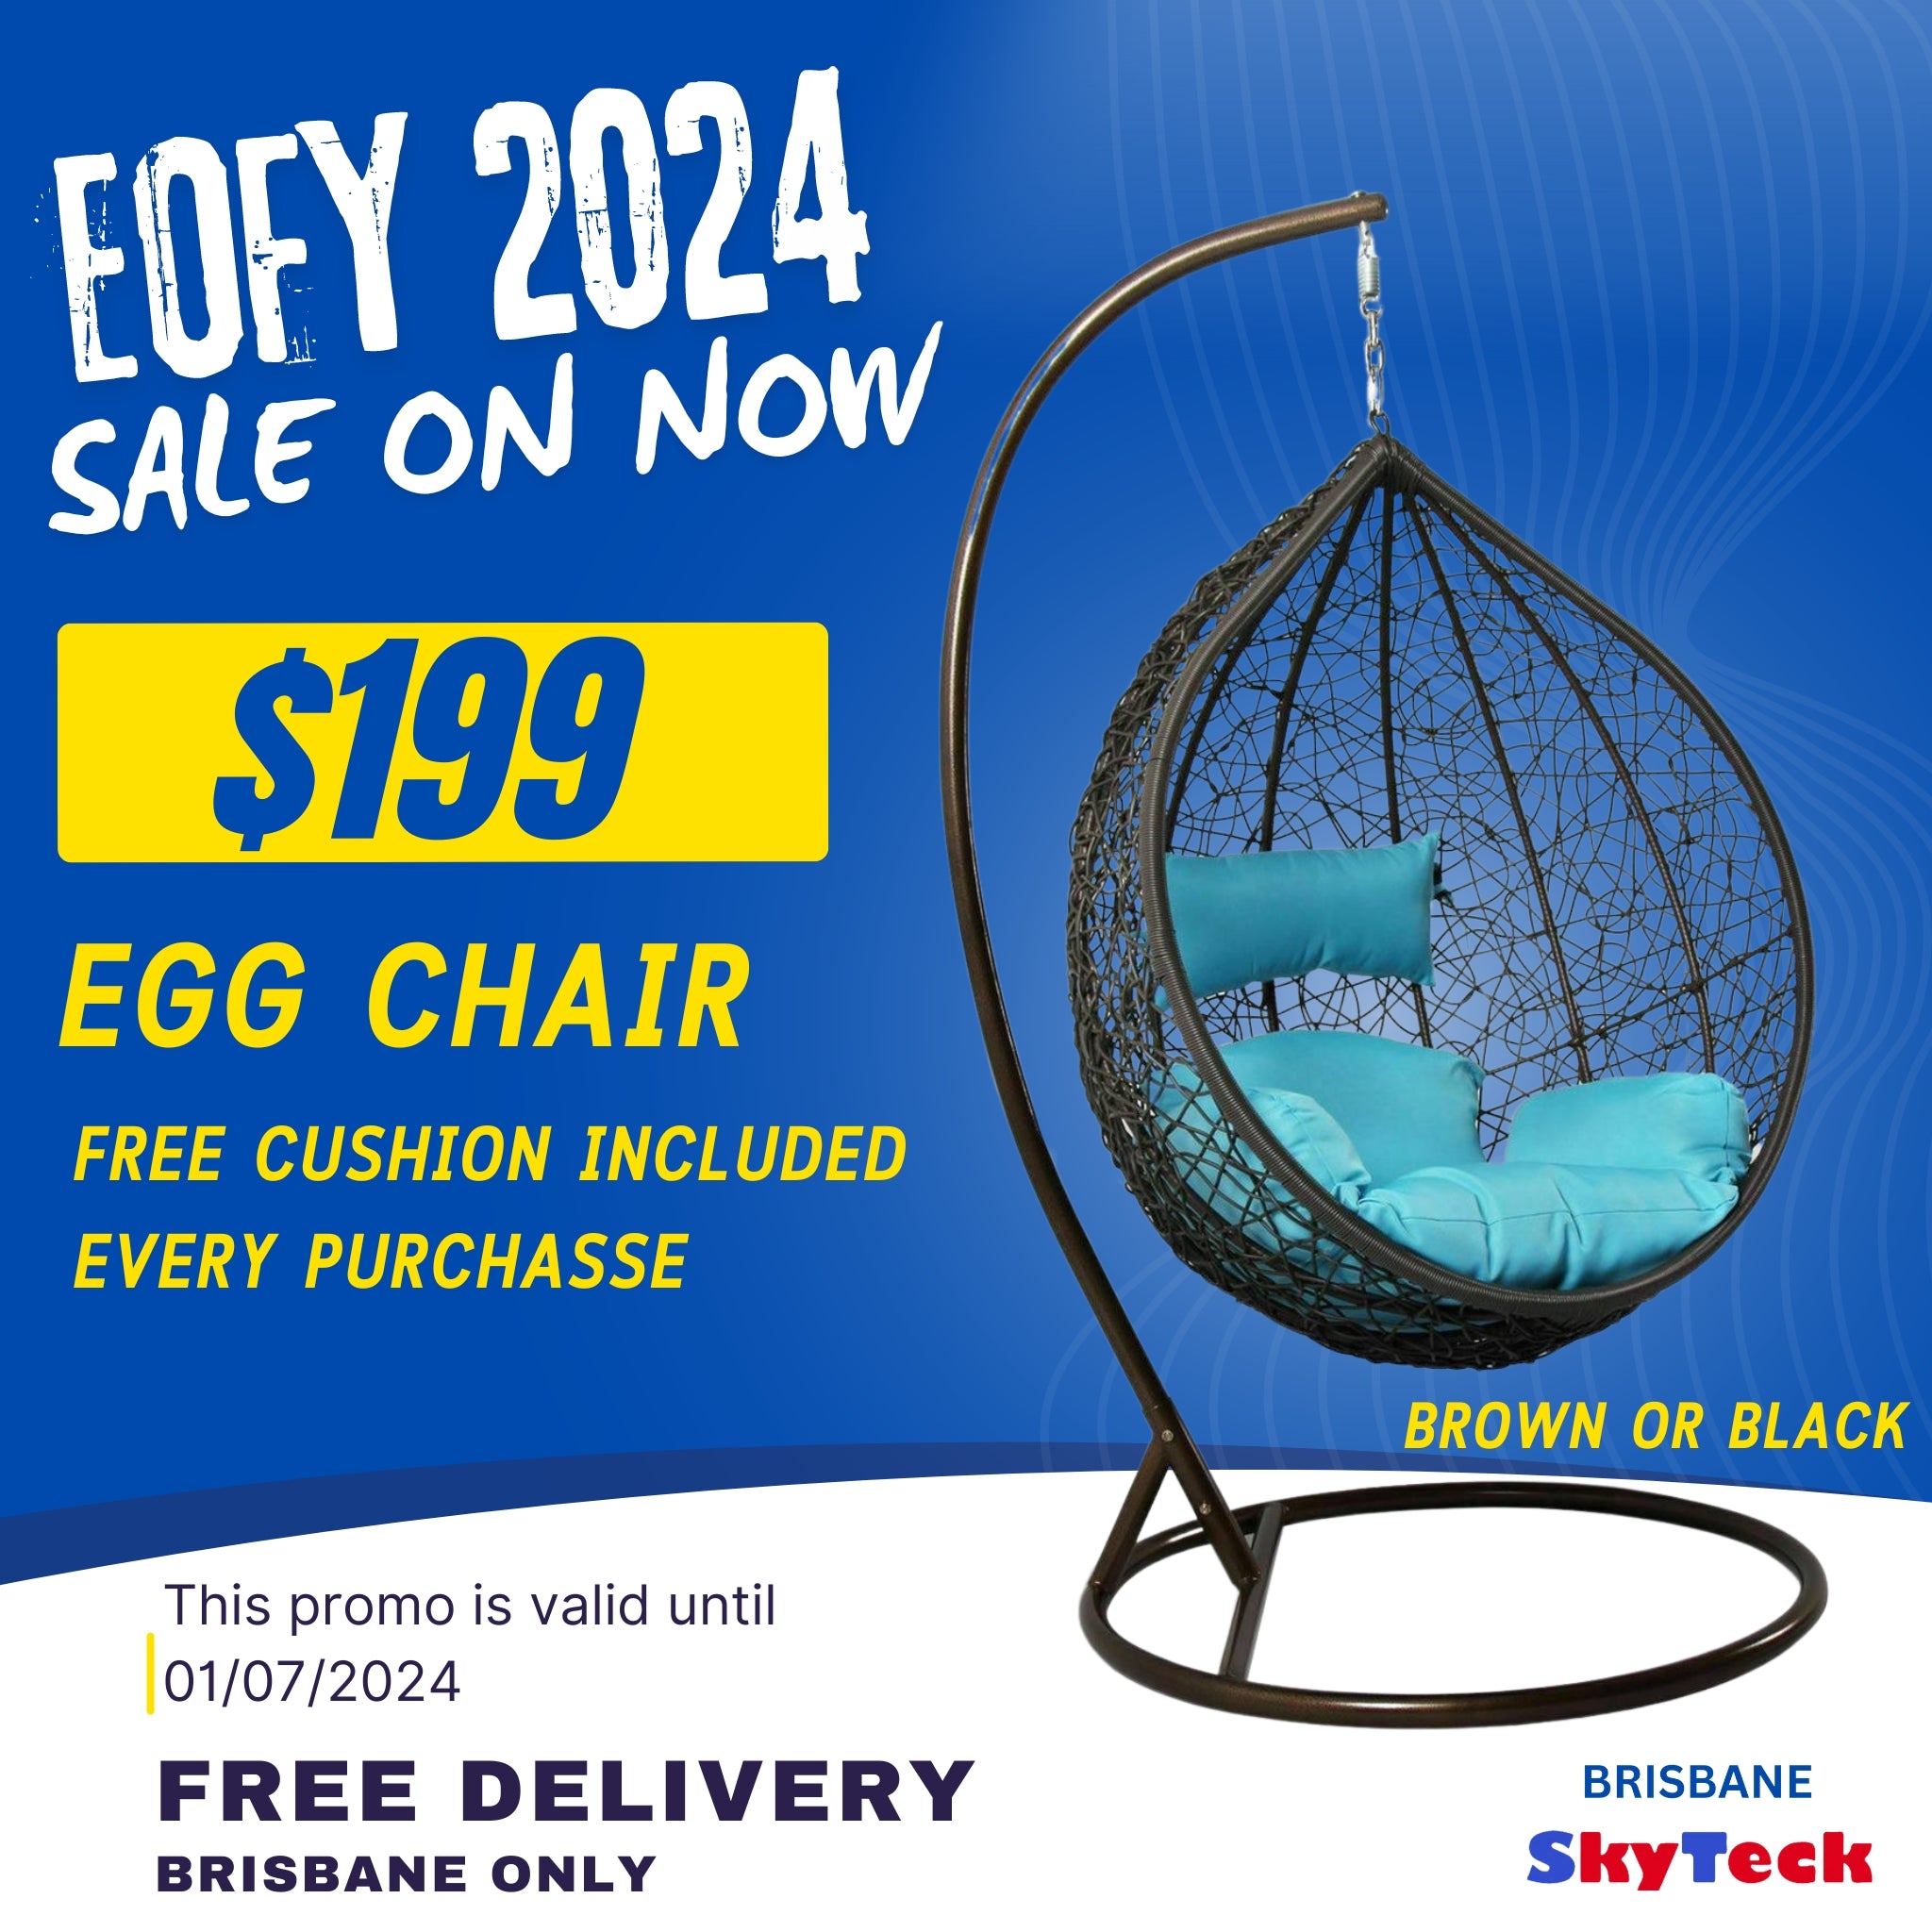 Free Delivery Balck BRAND NEW OUTDOOR DECOR HANGING SWINGING EGG/POD CHAIR FOR GARDEN HOME (BRISABNE ONLY)